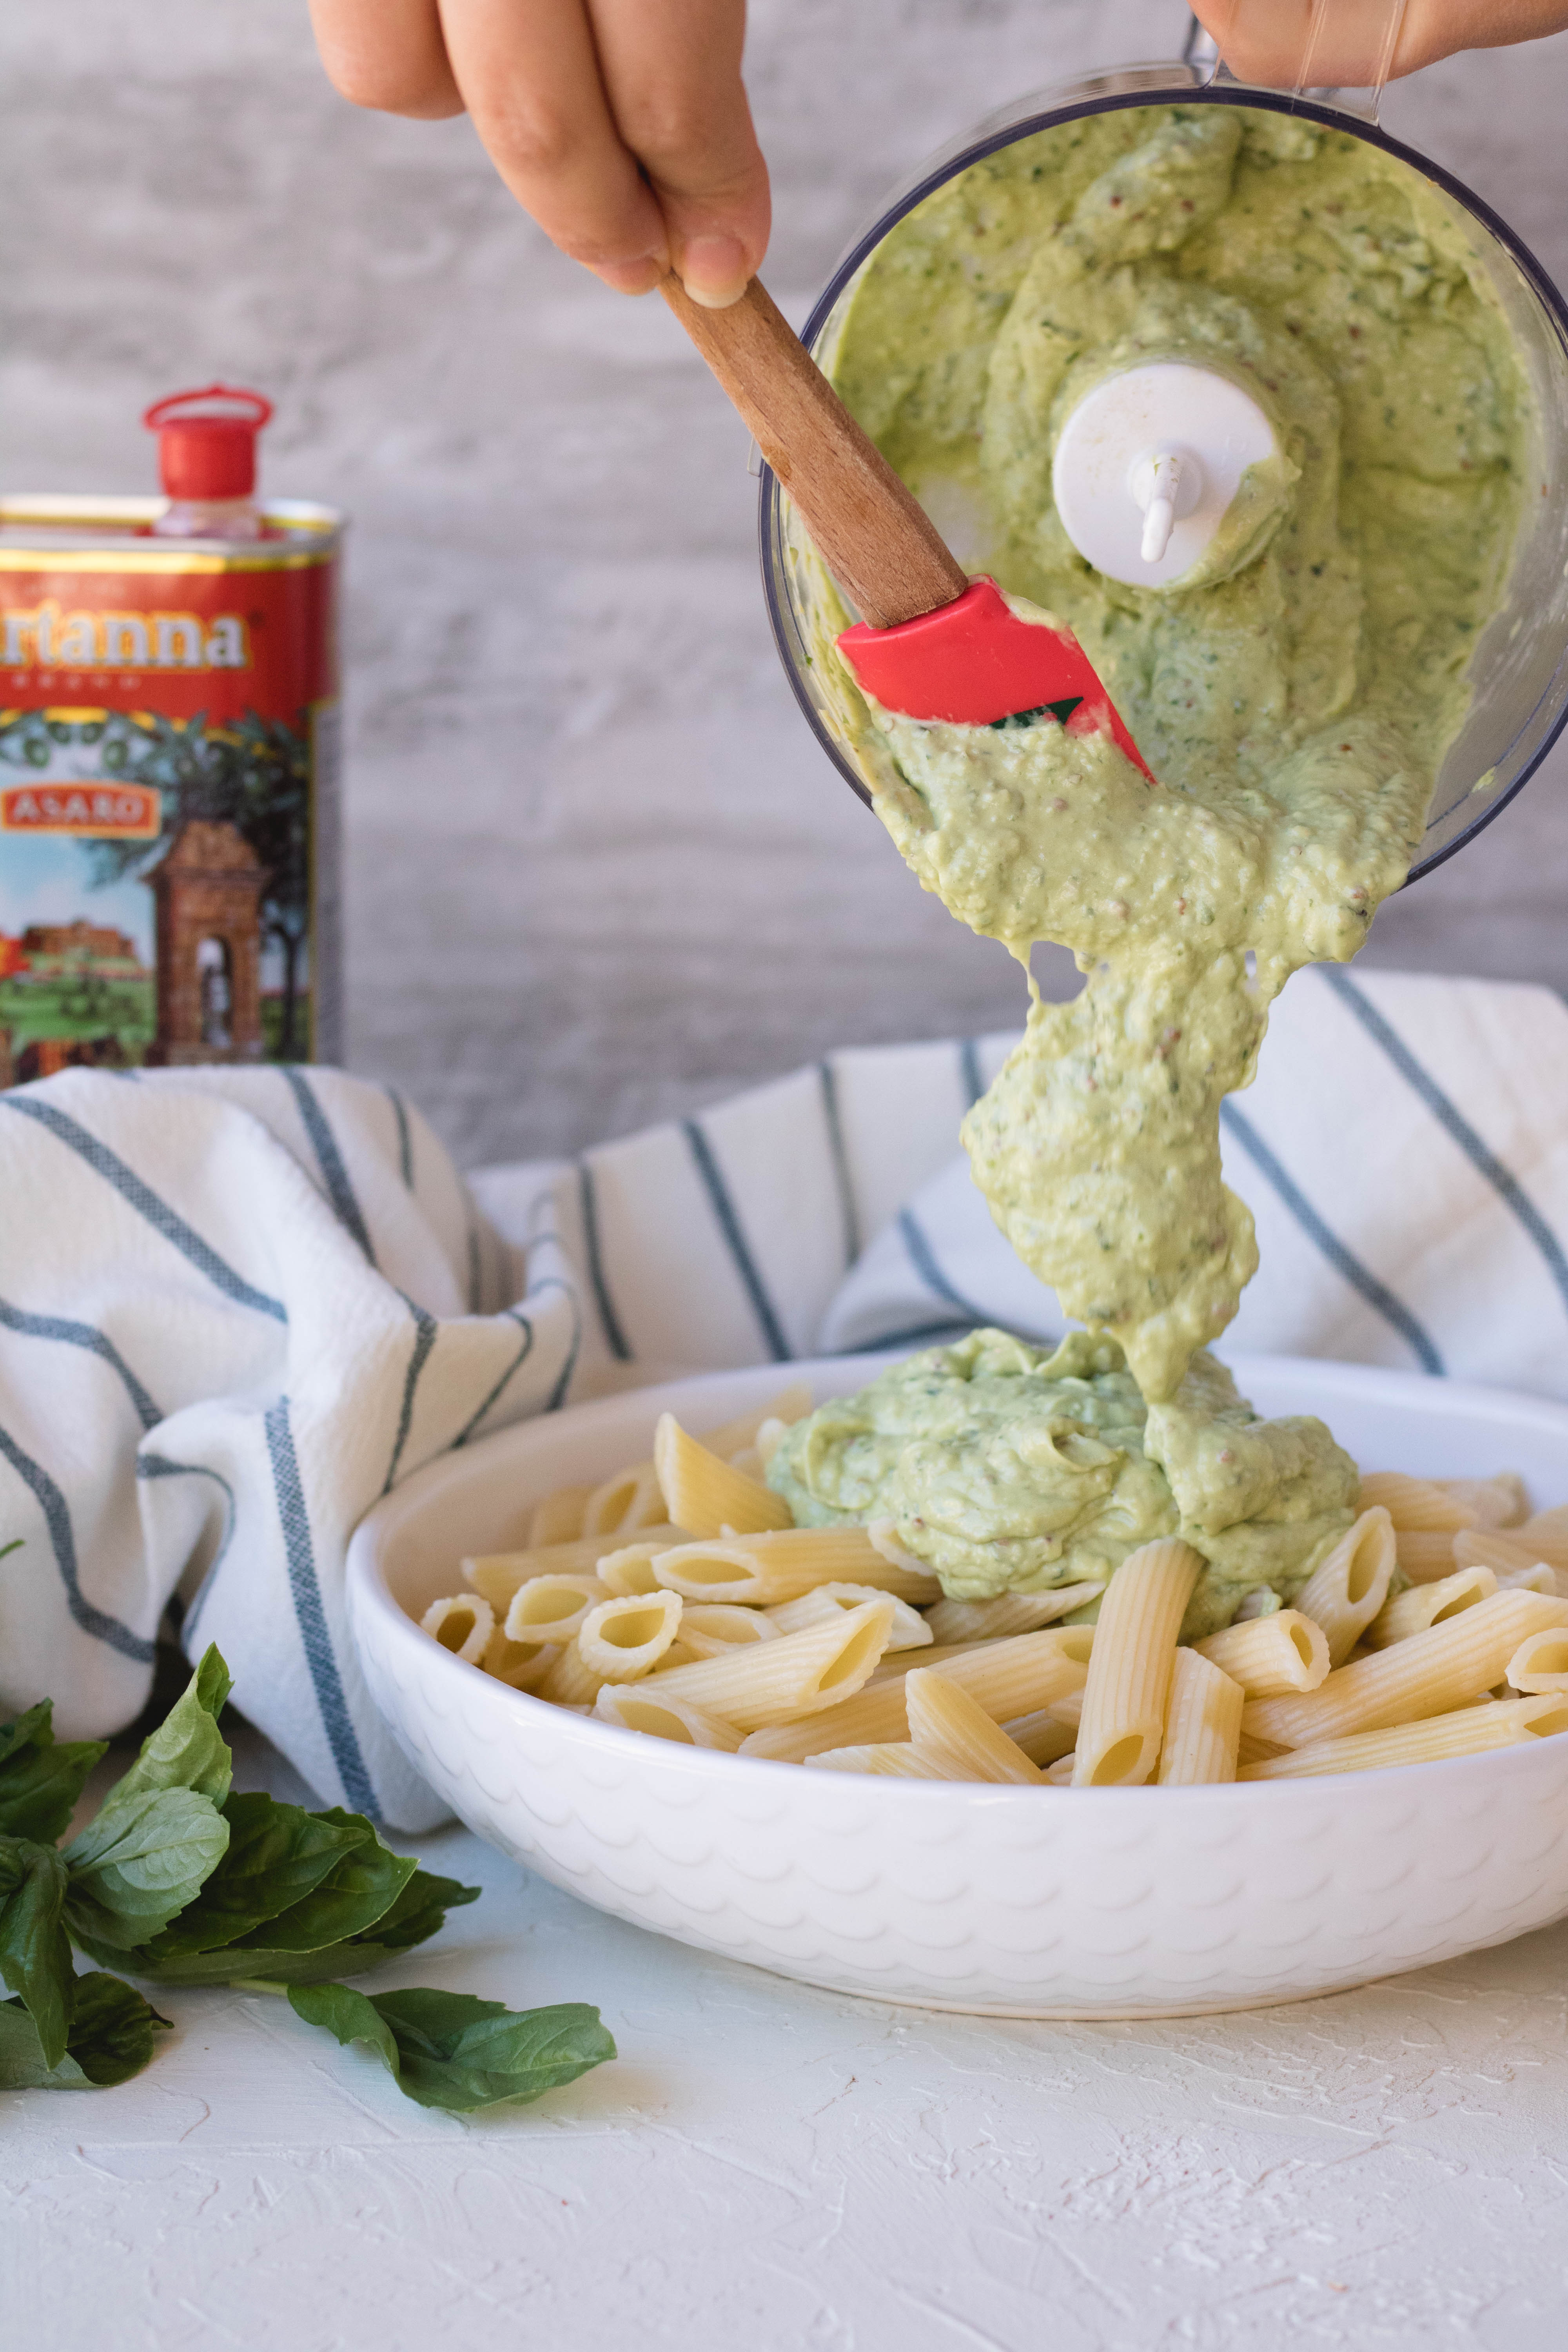 Pouring the avocado pasta sauce over the penne pasta